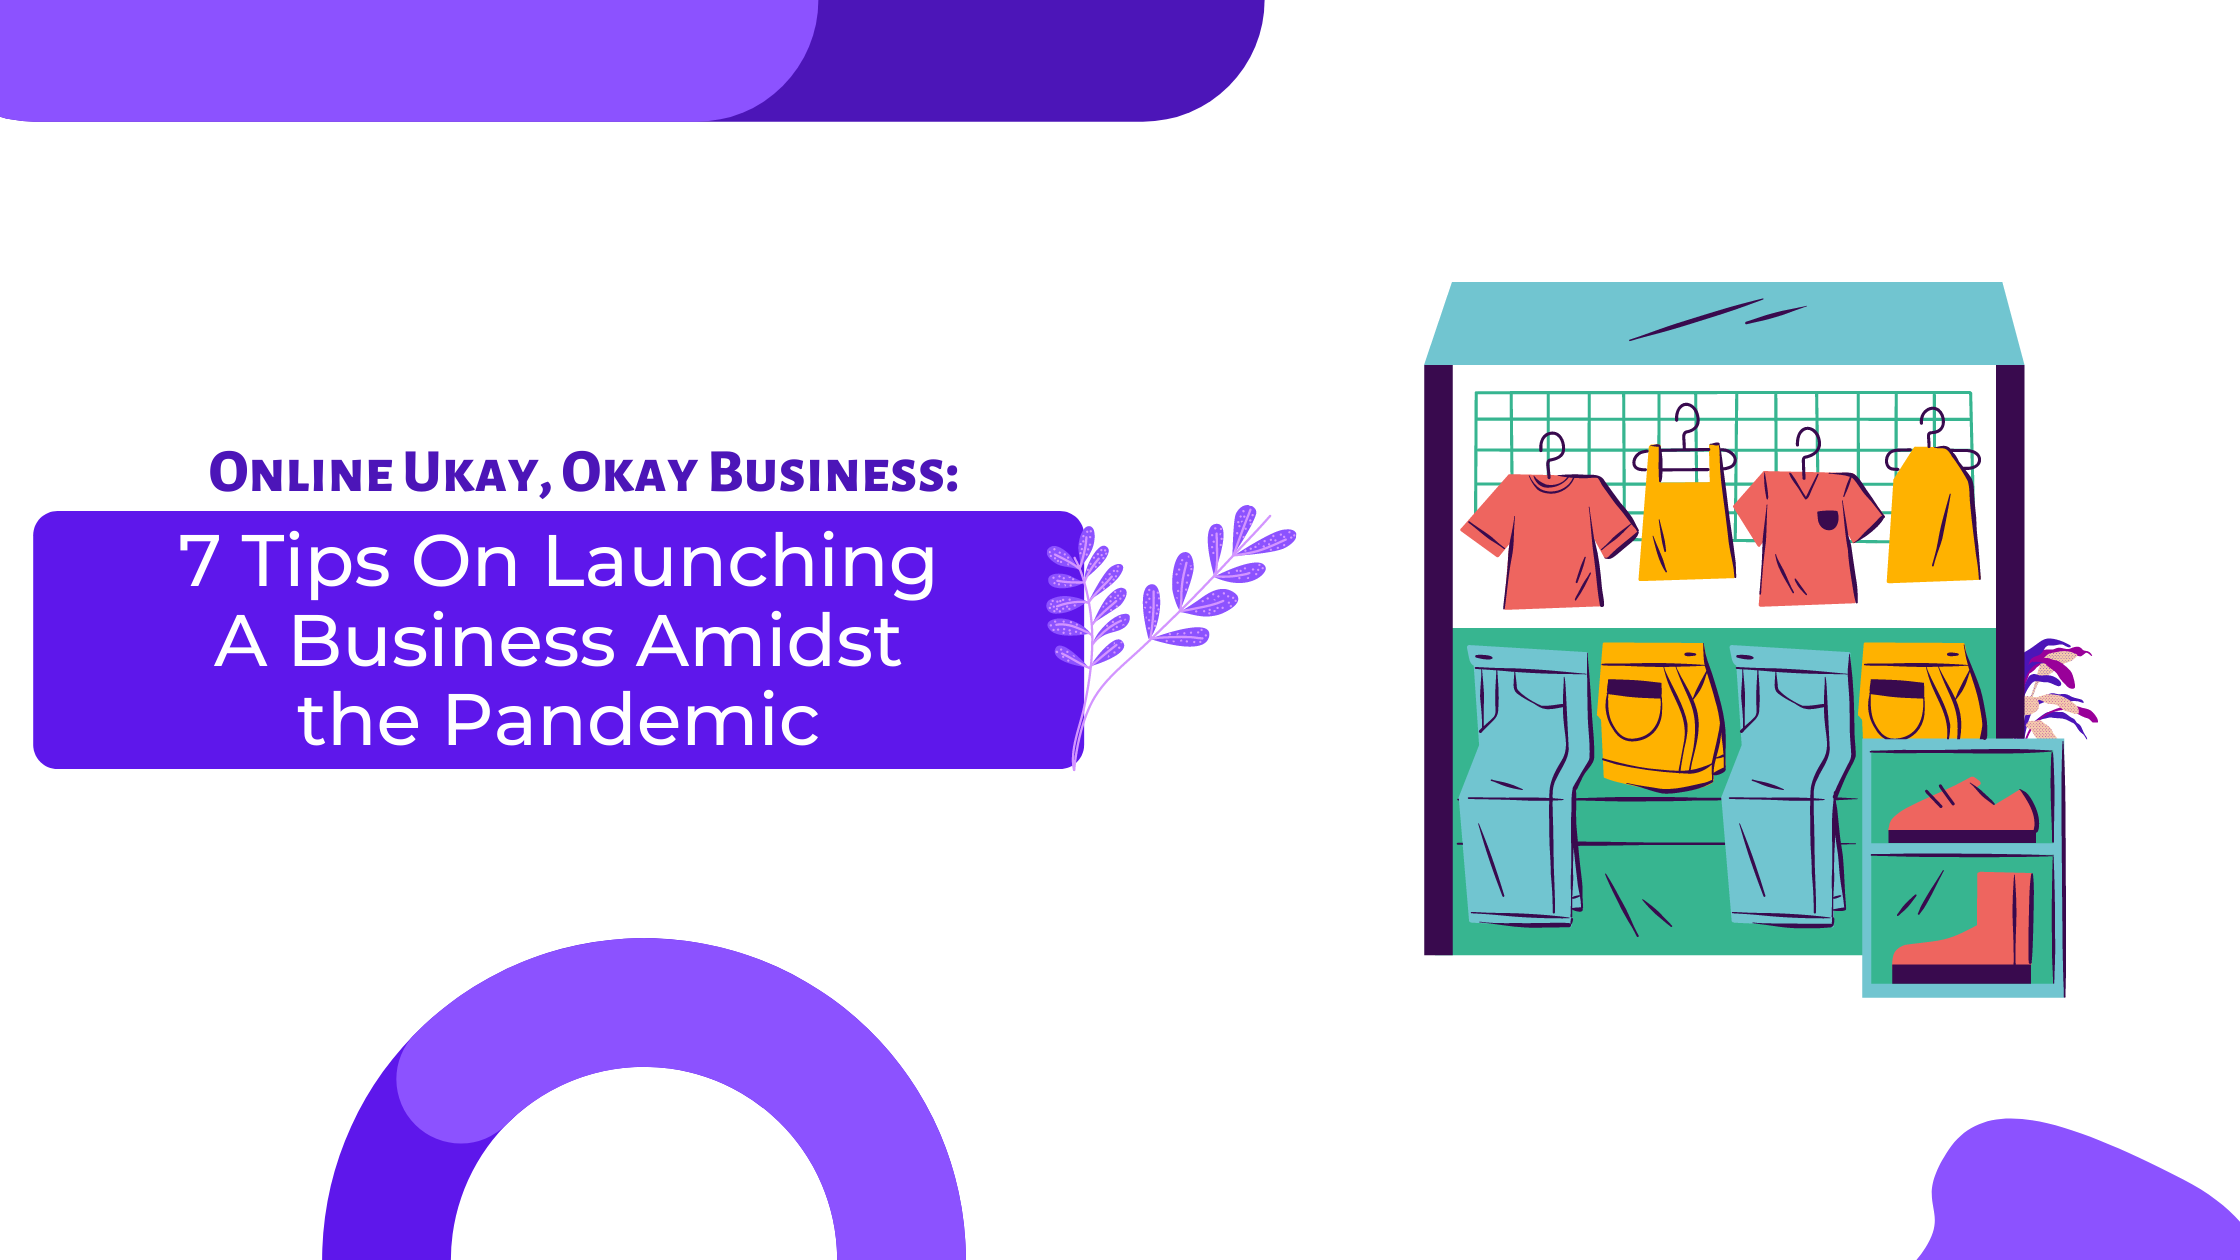 Online Ukay, Okay Business 7 Tips On Launching A Business Amidst The Pandemic